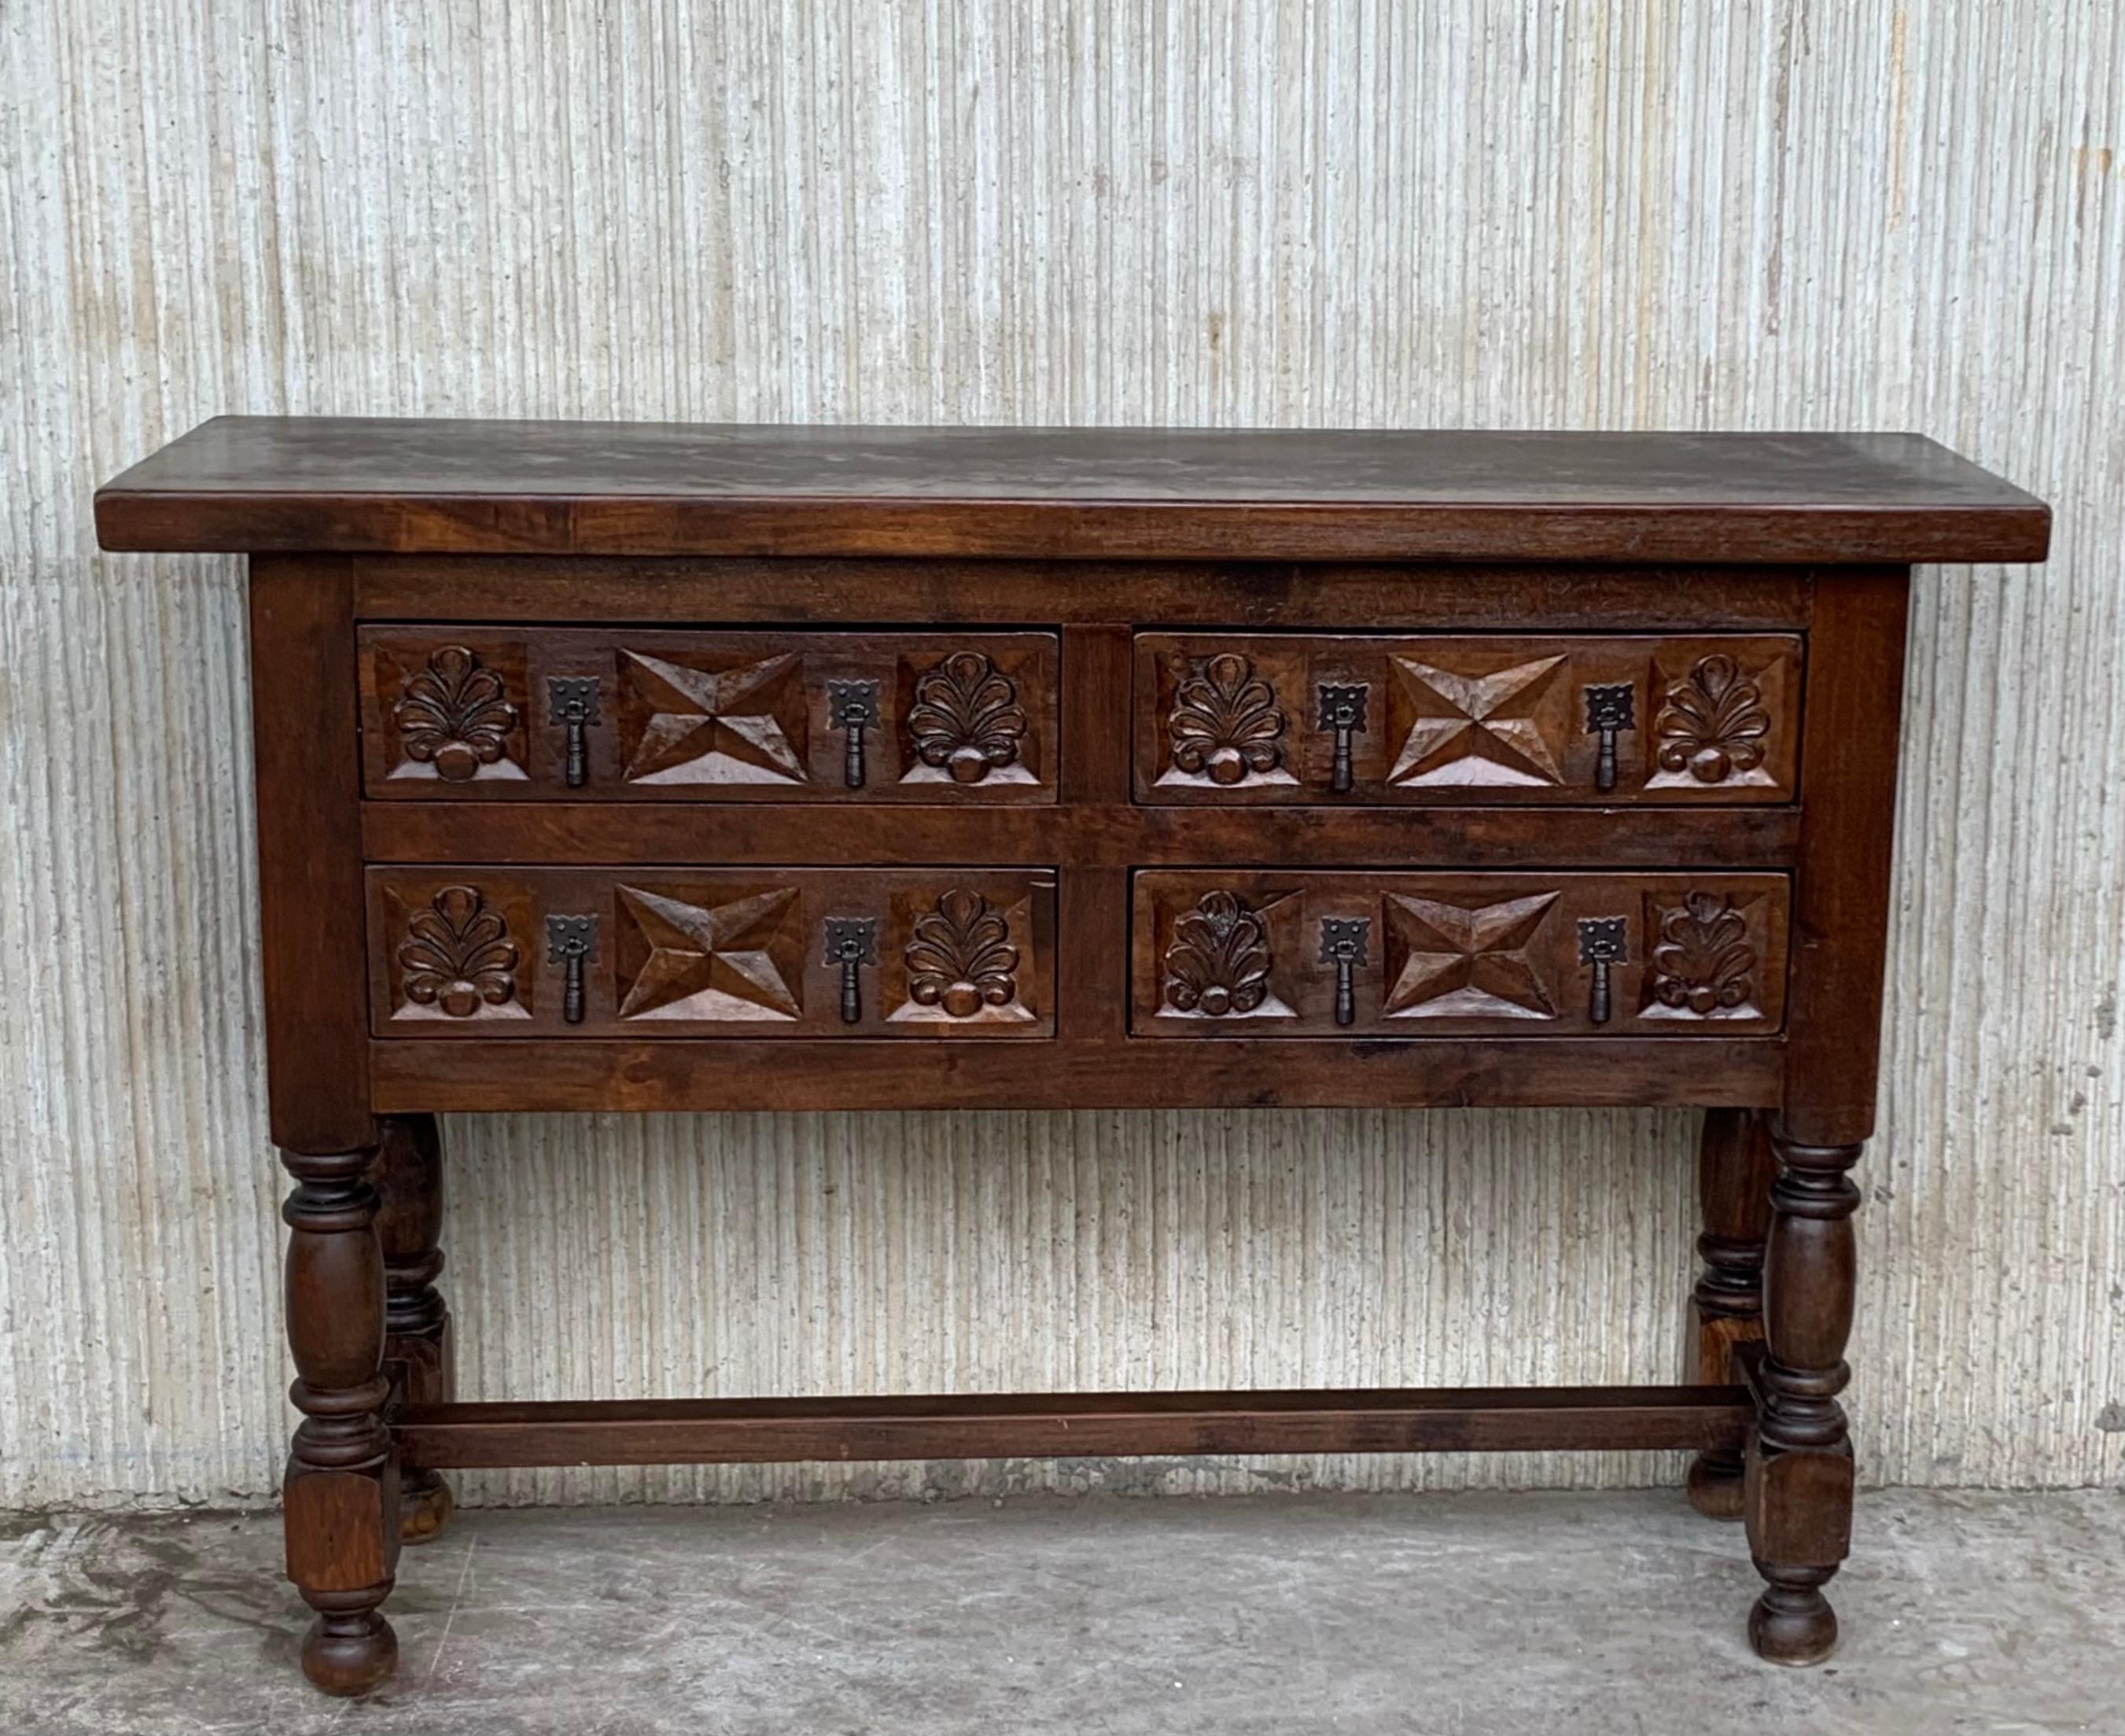 19th century Spanish antique pine walnut console sofa table with the four drawers and original iron hardware.
You can use like a commode or chest of drawers
This elegant console was crafted in Spain, circa 1890. The sofa table with four legs